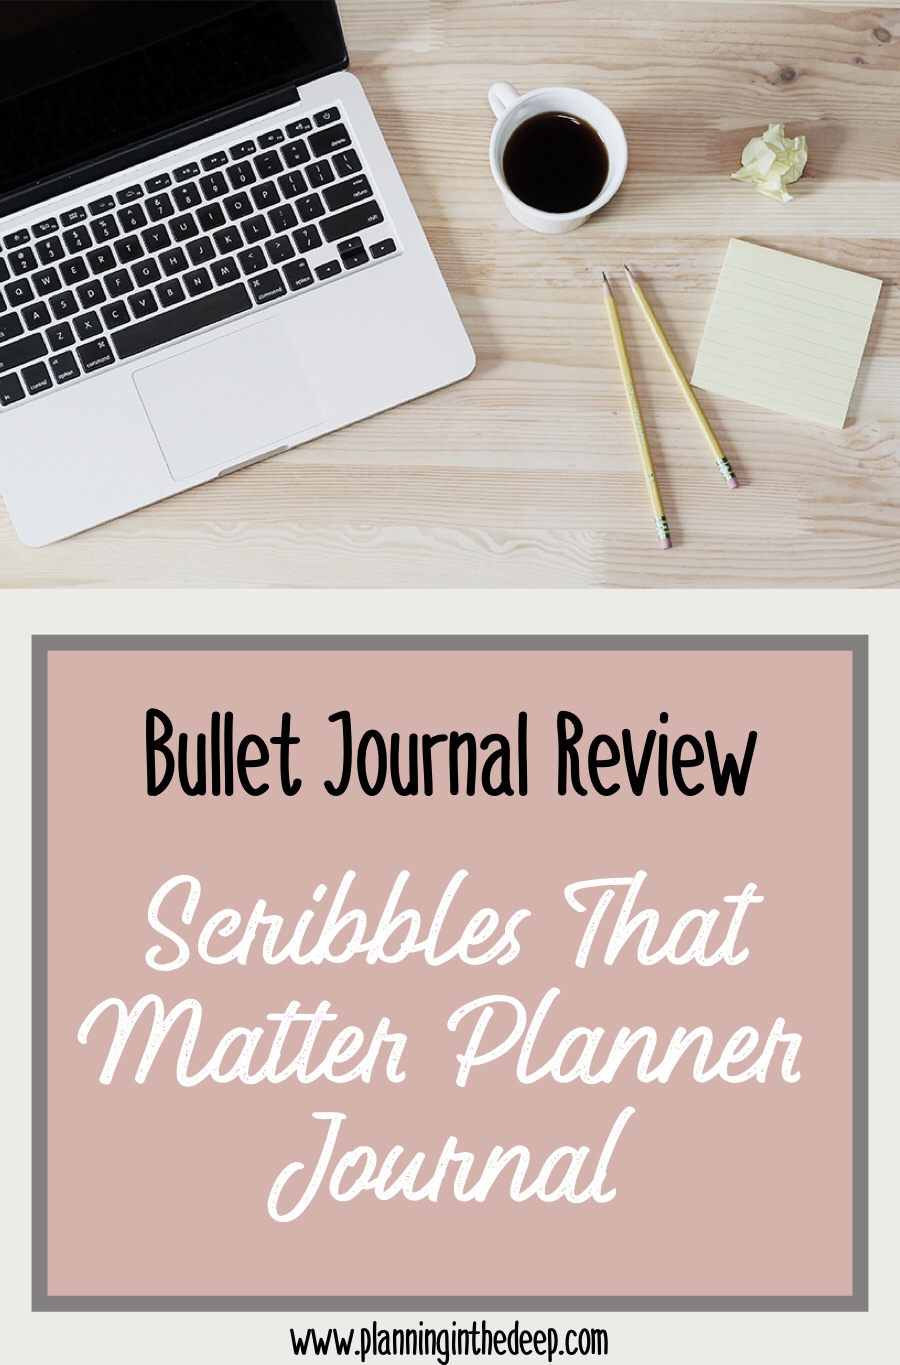 Scribbles That Matter Bullet Journal Notebook Review - Home is